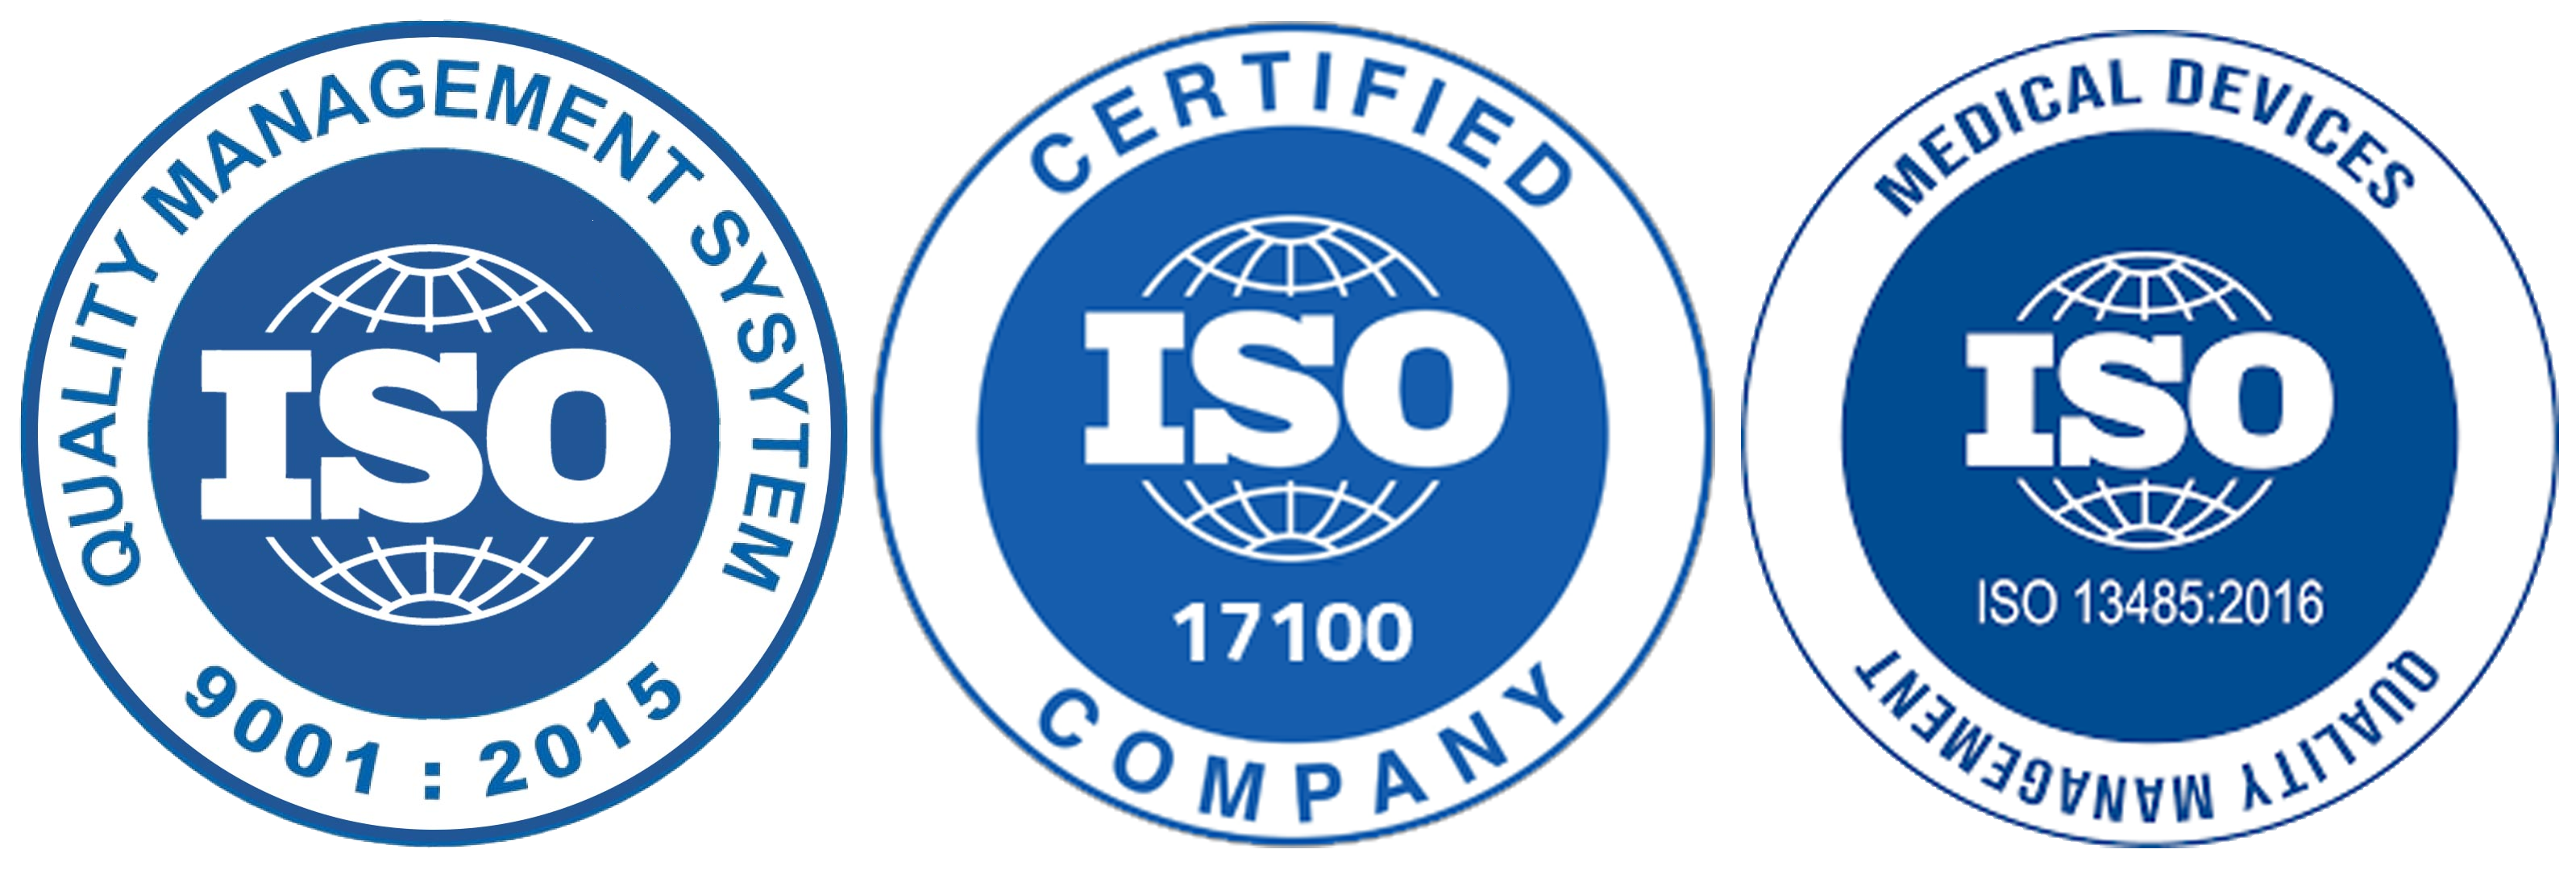 Certification ISO 9001 Quality Management System, ISO 17100 Translation Services, ISO 13485 Medical Devices